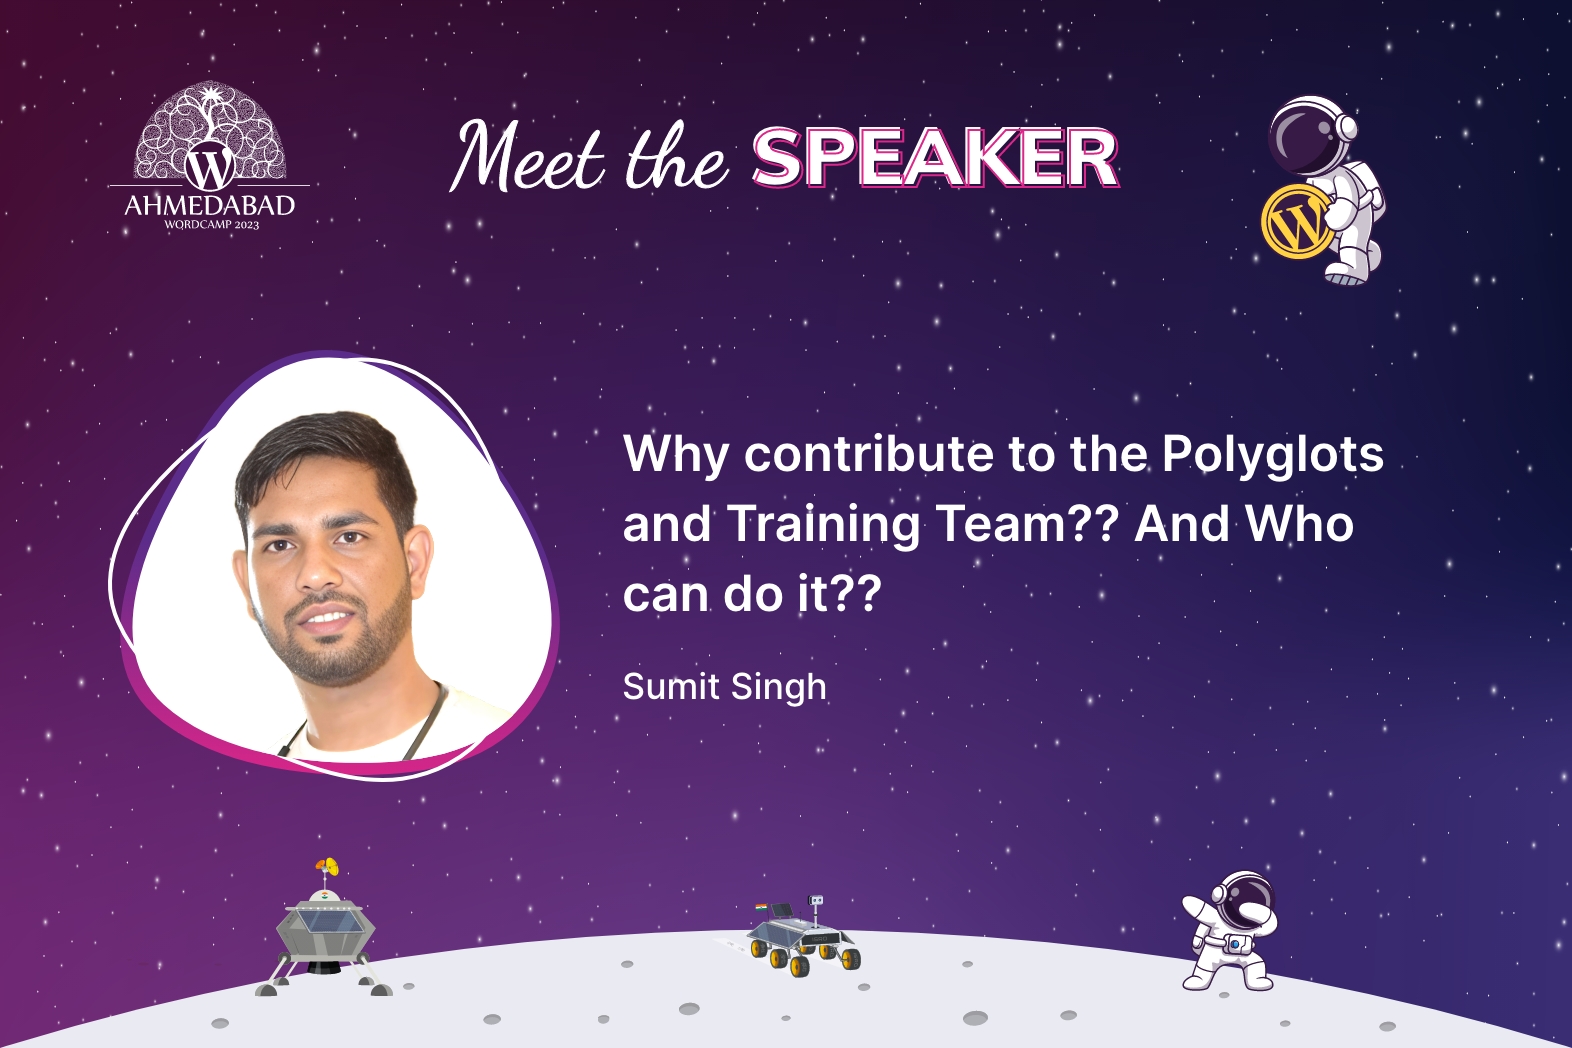 Why contribute to the Polyglots and Training Team? And Who can do it? By Sumit Singh